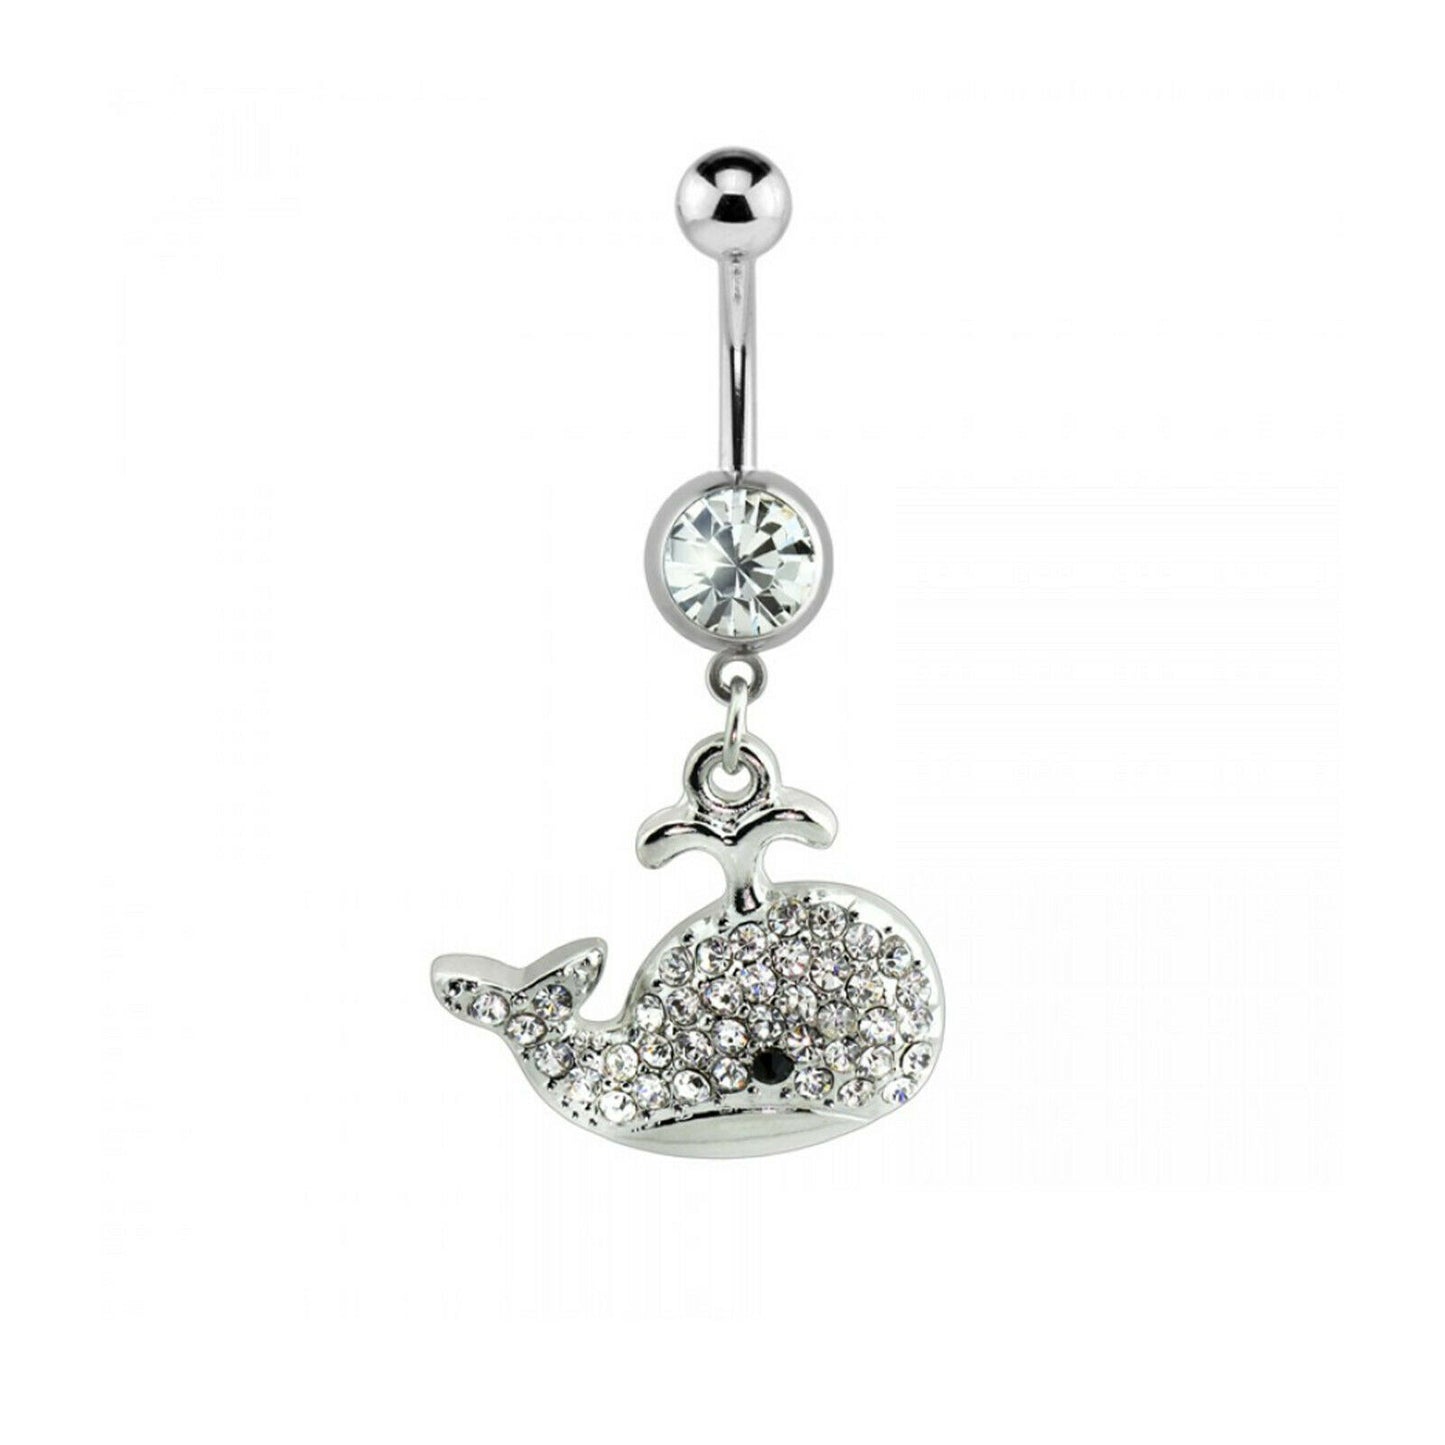 Belly Button Ring Naval ring Gem Paved Whale Surgical Steel 14G Fit